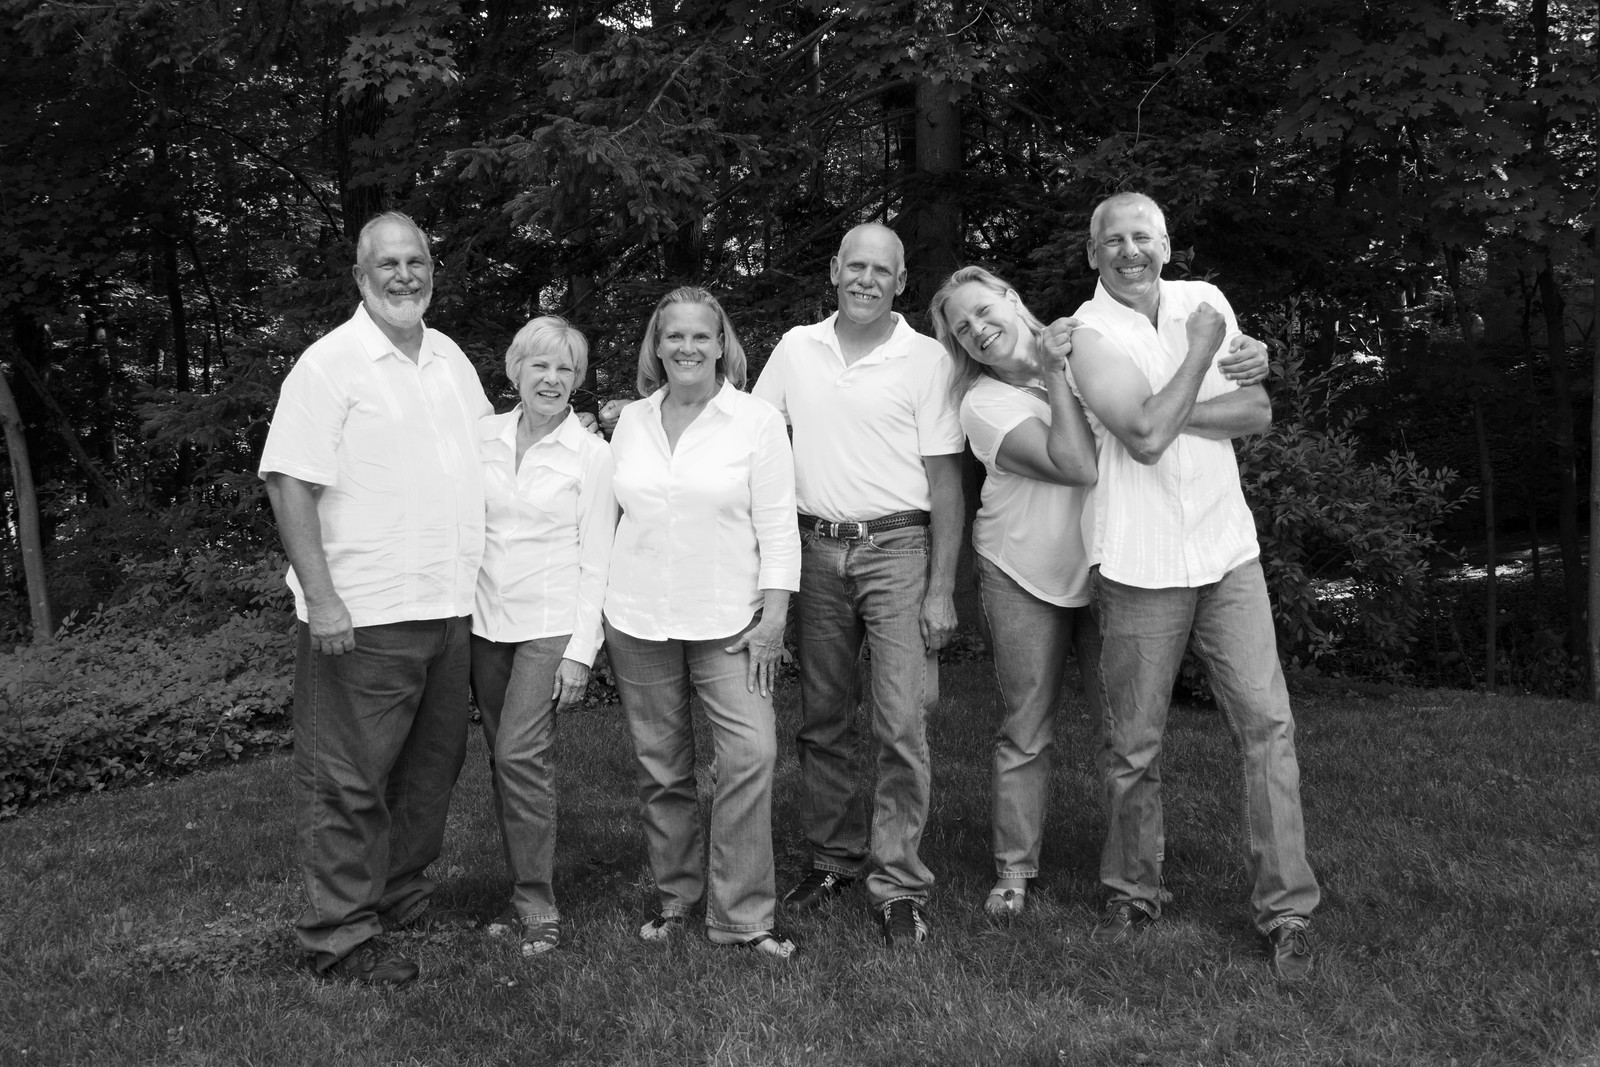 family portraits, family photographer, ct family photographer, families, siblings, outdoor family photography, location portraits, black and white photography